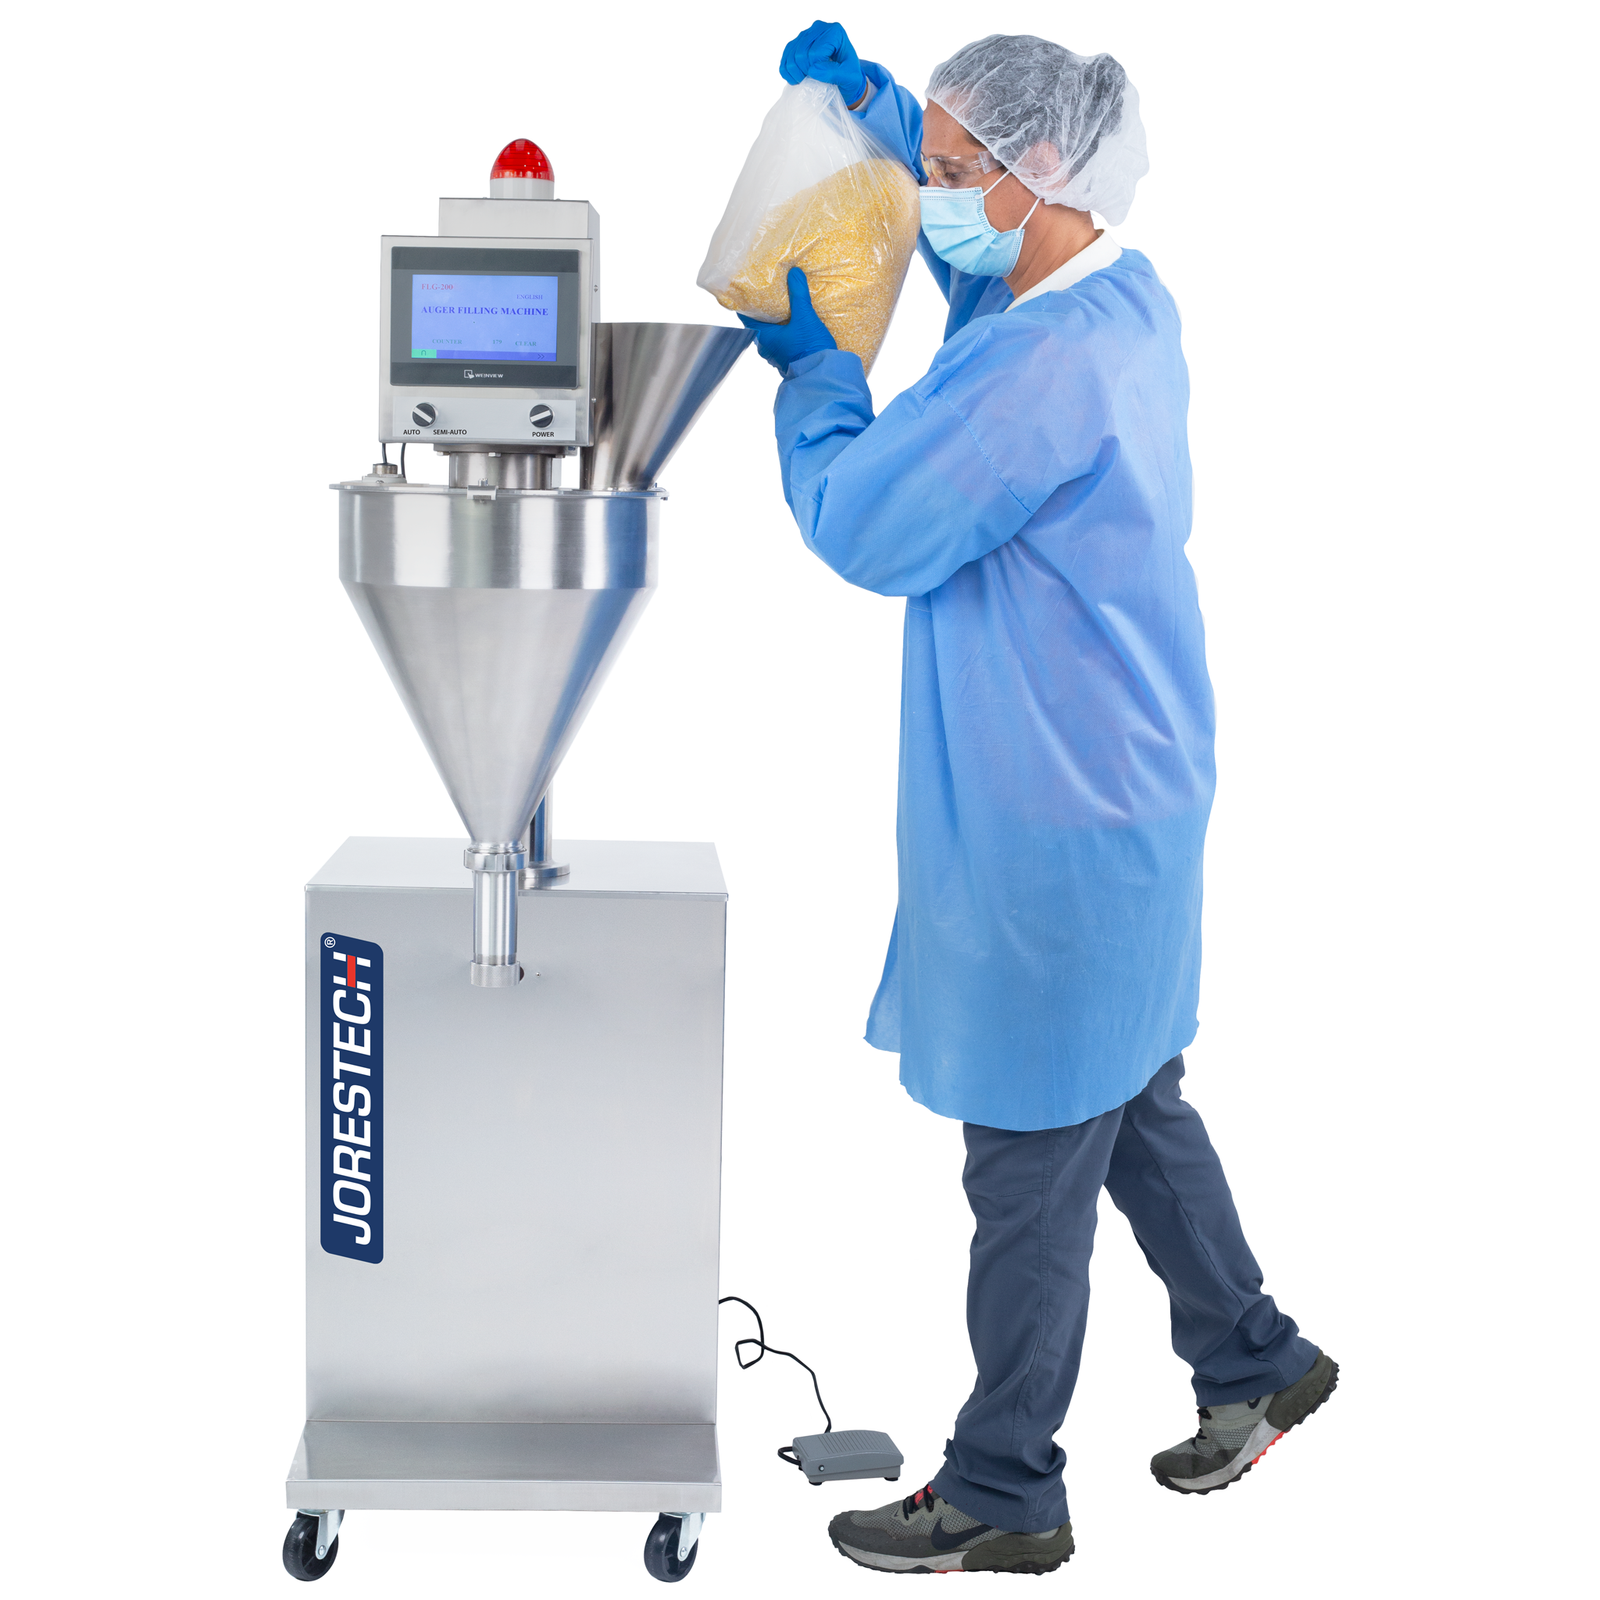 Close-up picture of a worker with blue latex gloves and dressed in PPE holding a clear bag filled with cornmeal. The bag is held over the feeding cone of the JORES TECHNOLOGIES® auger powder filler, which will be used to dispense the flour into containers.